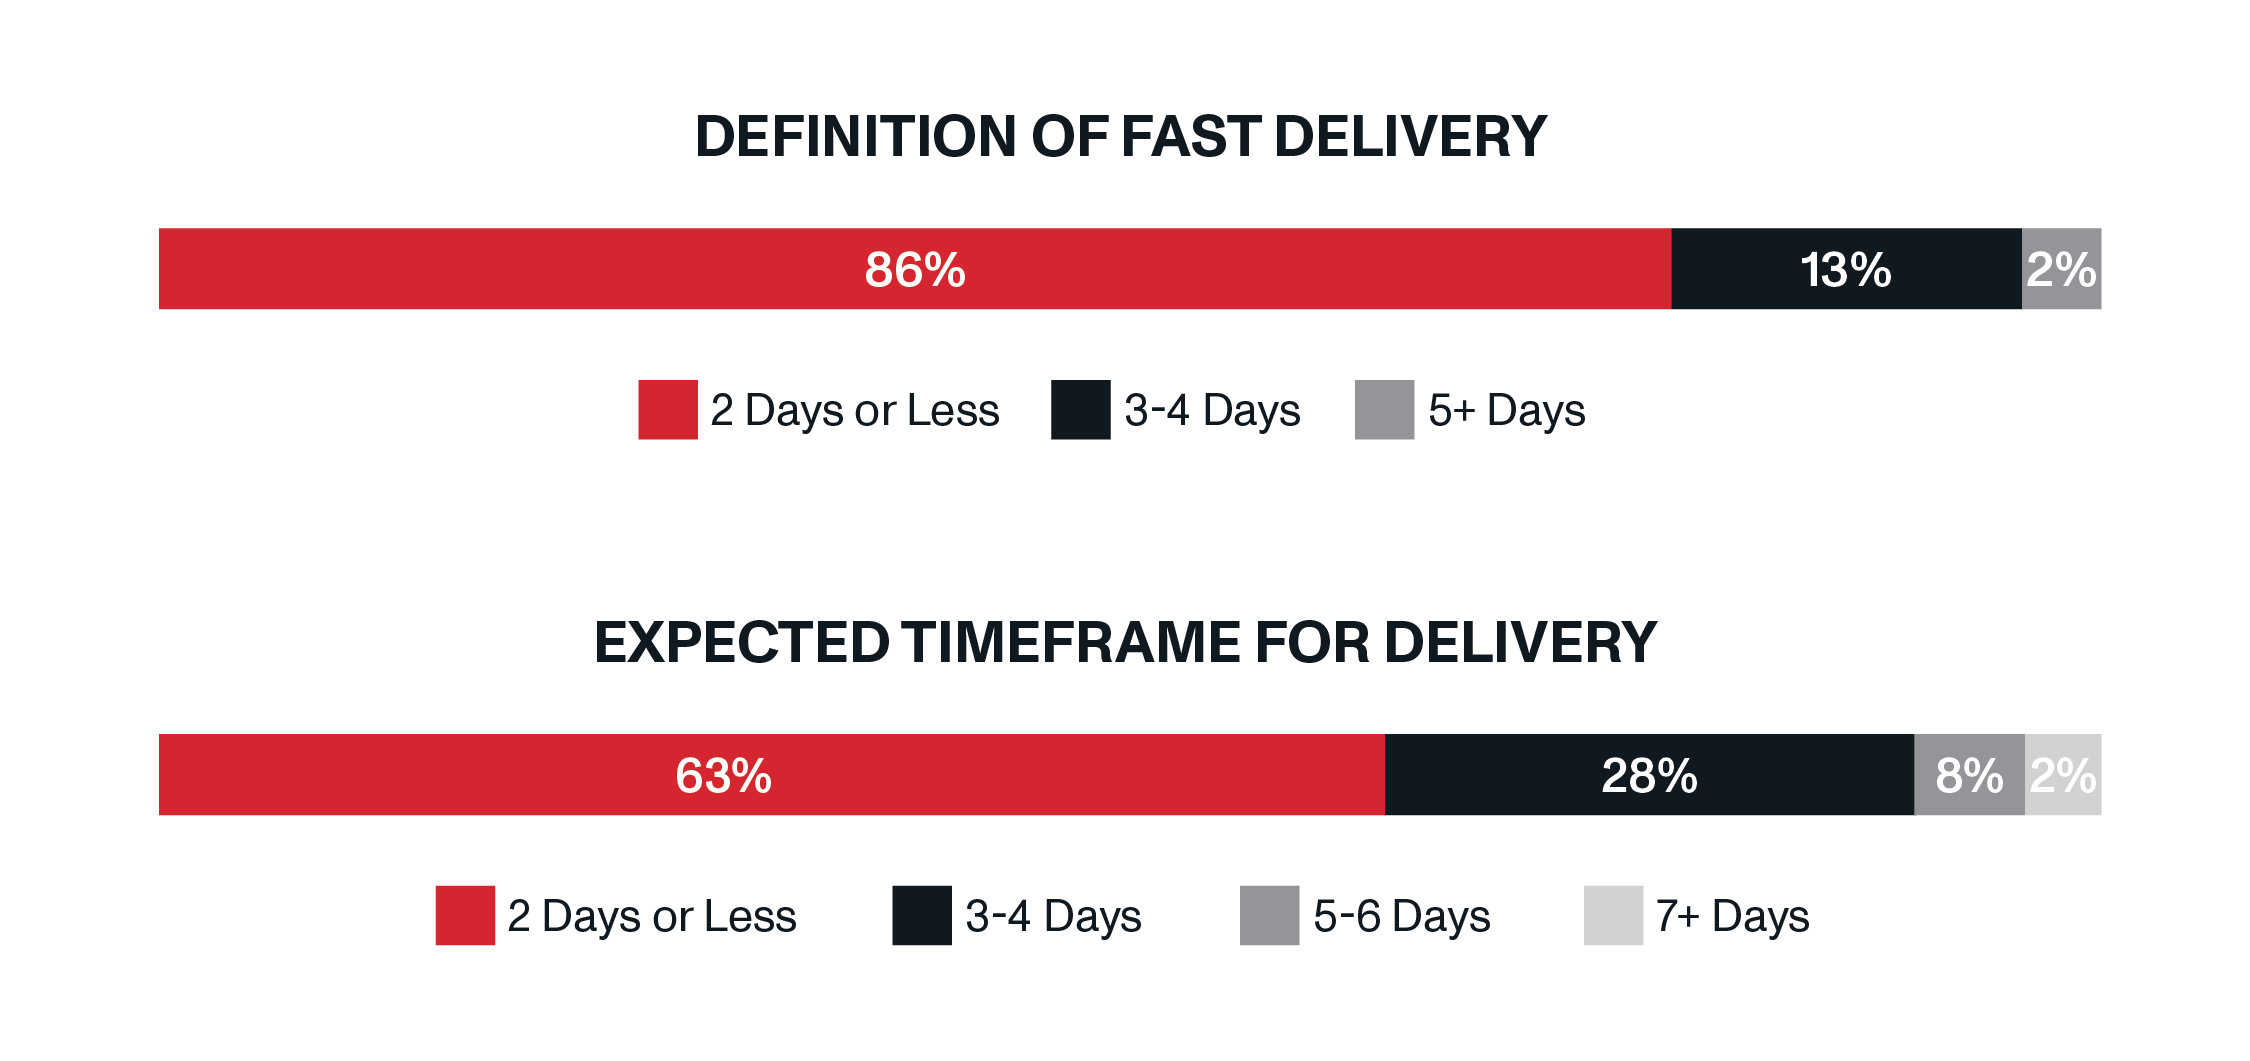 86% of consumers define fast delivery as two days or less and 63% expect to receive their items within this timeframe. 